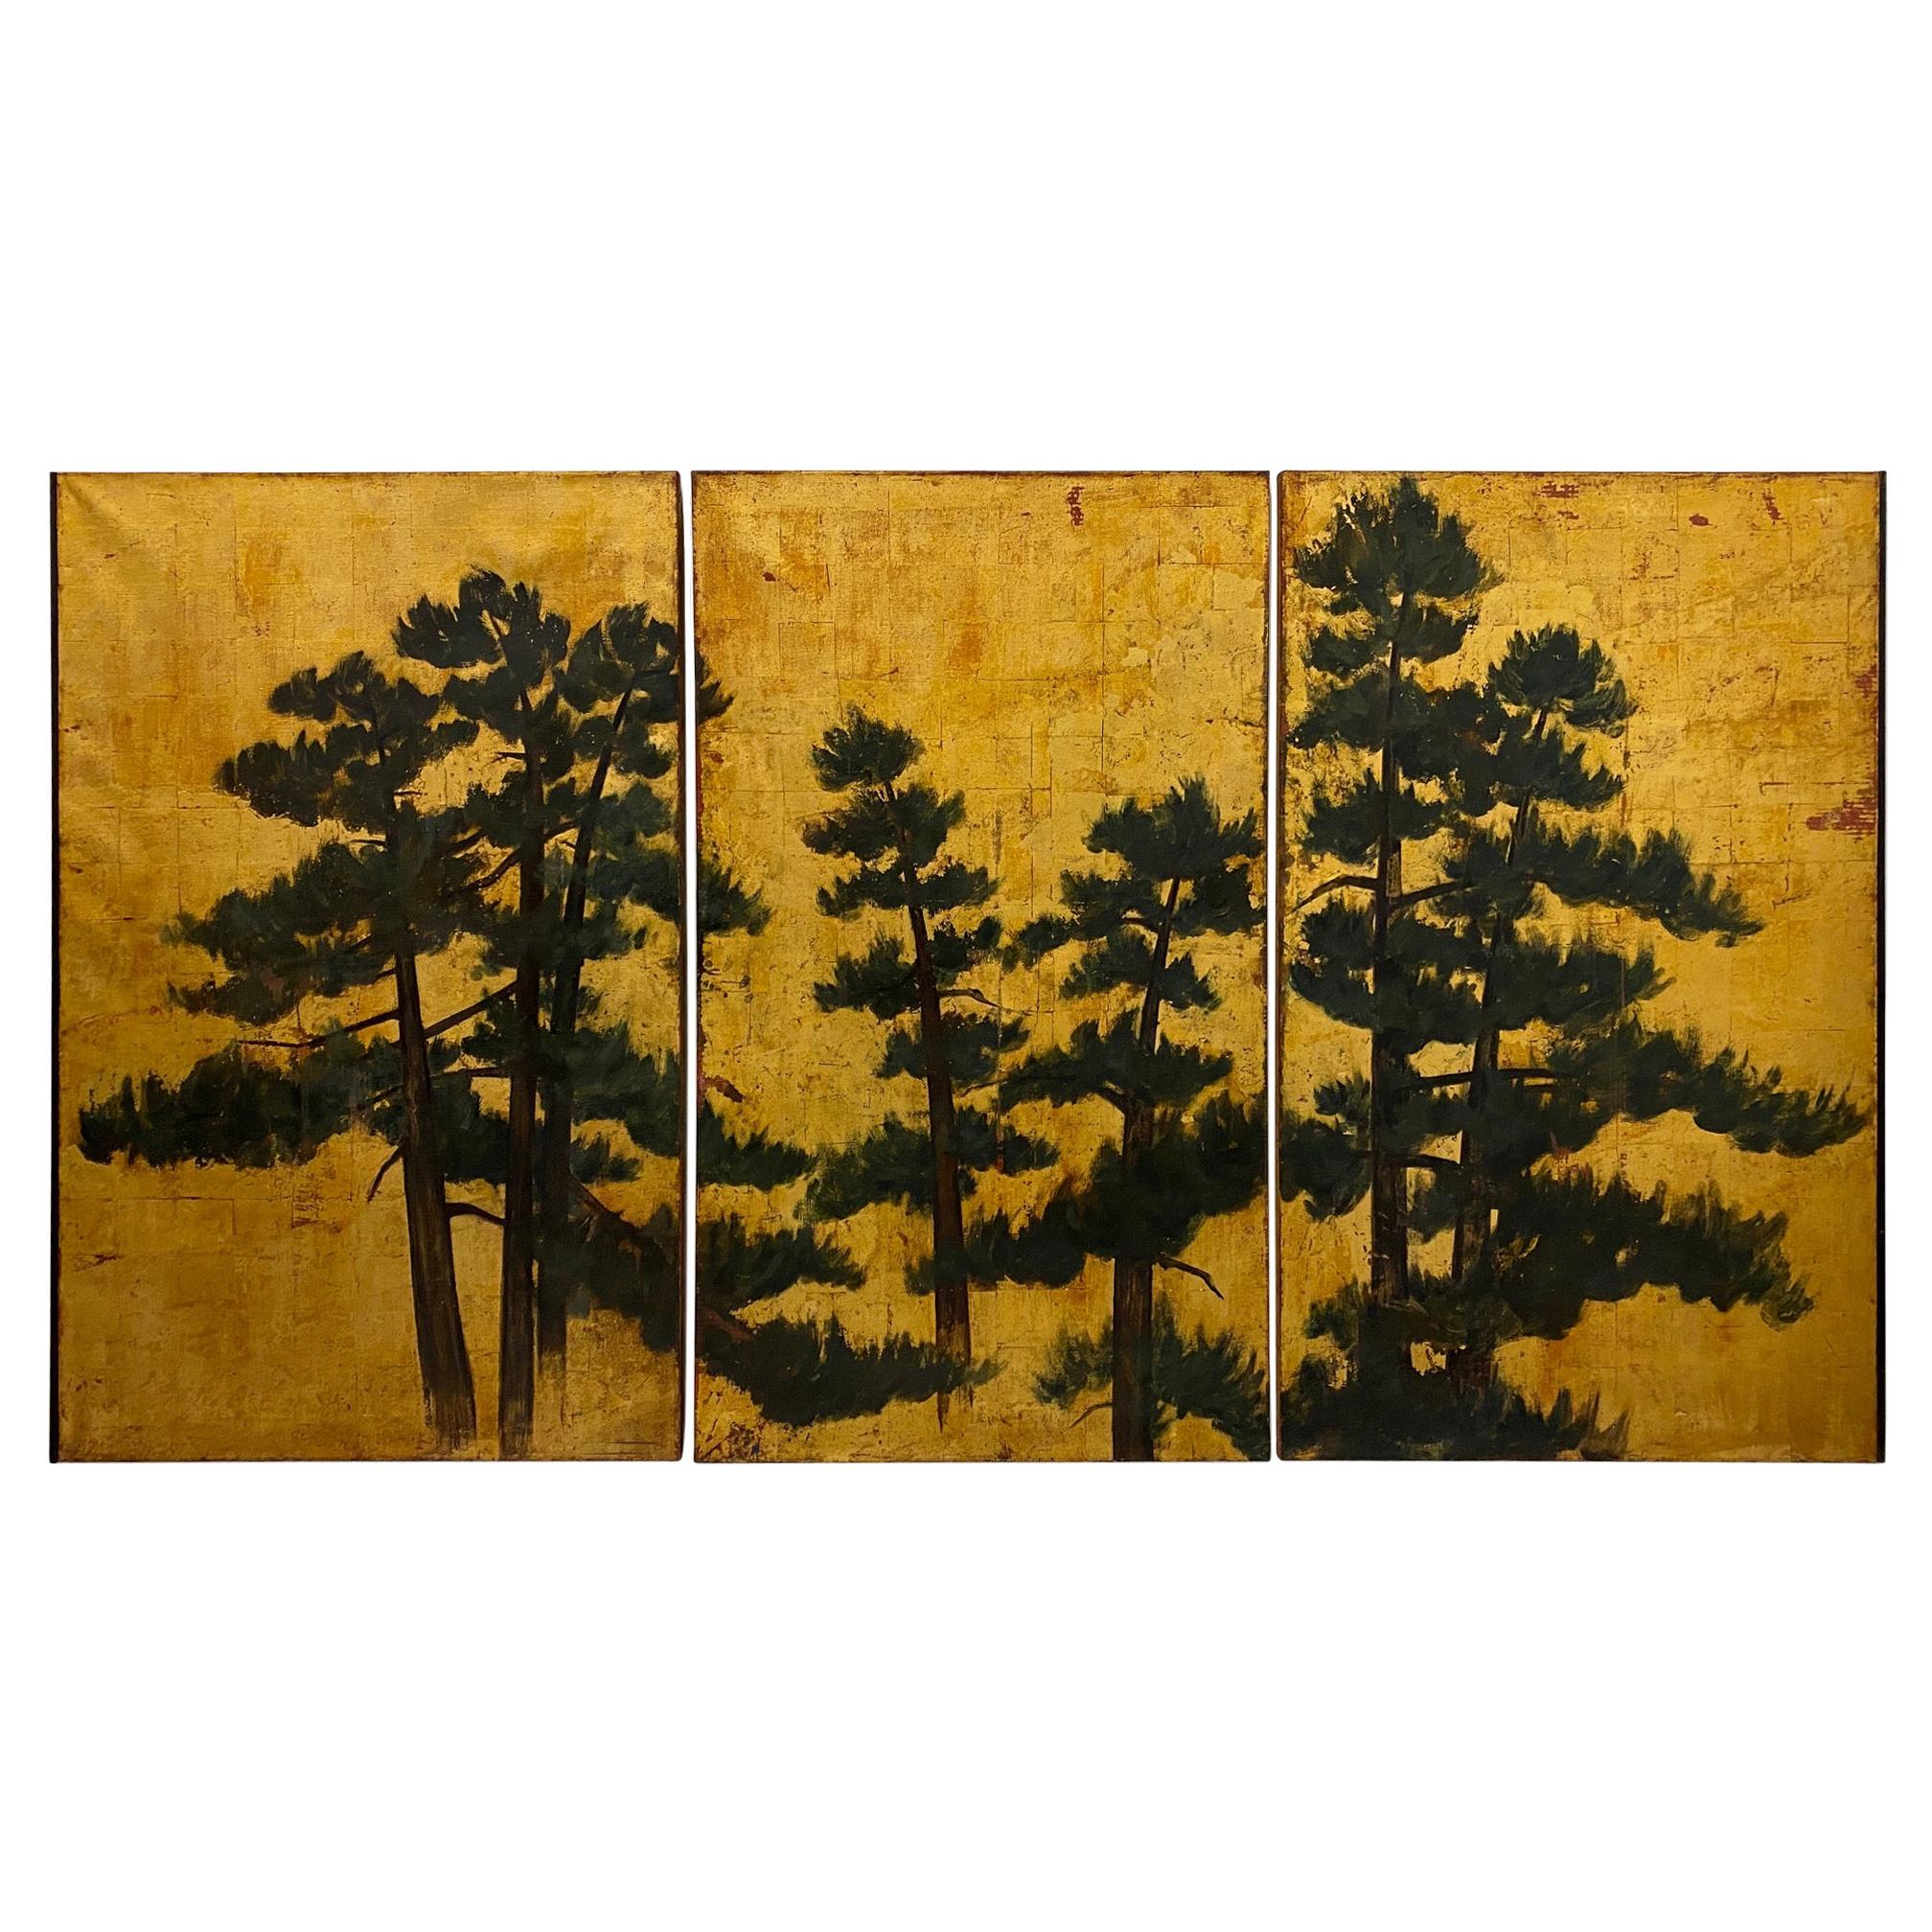 Exceptional Large 19th Century Triptych of Pine Trees Against Gold Leaf Sky